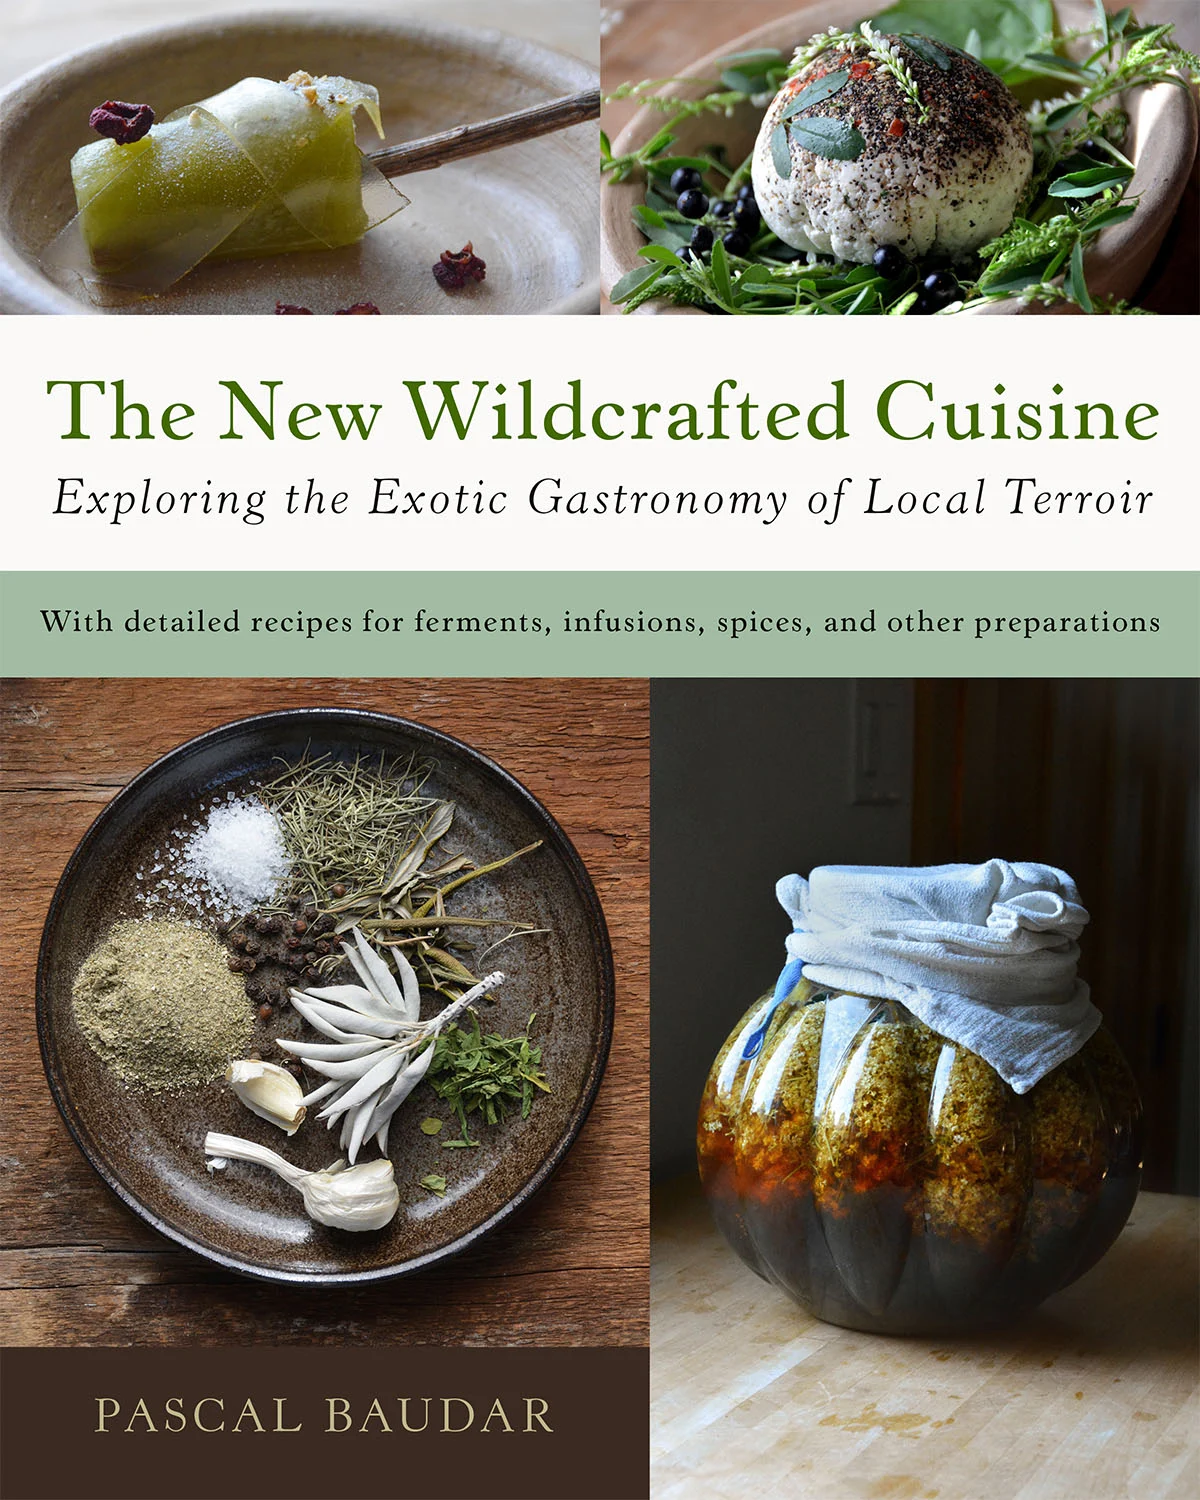 Image The New Wildcrafted Cuisine : exploring the exotic gastronomy of local terroir.